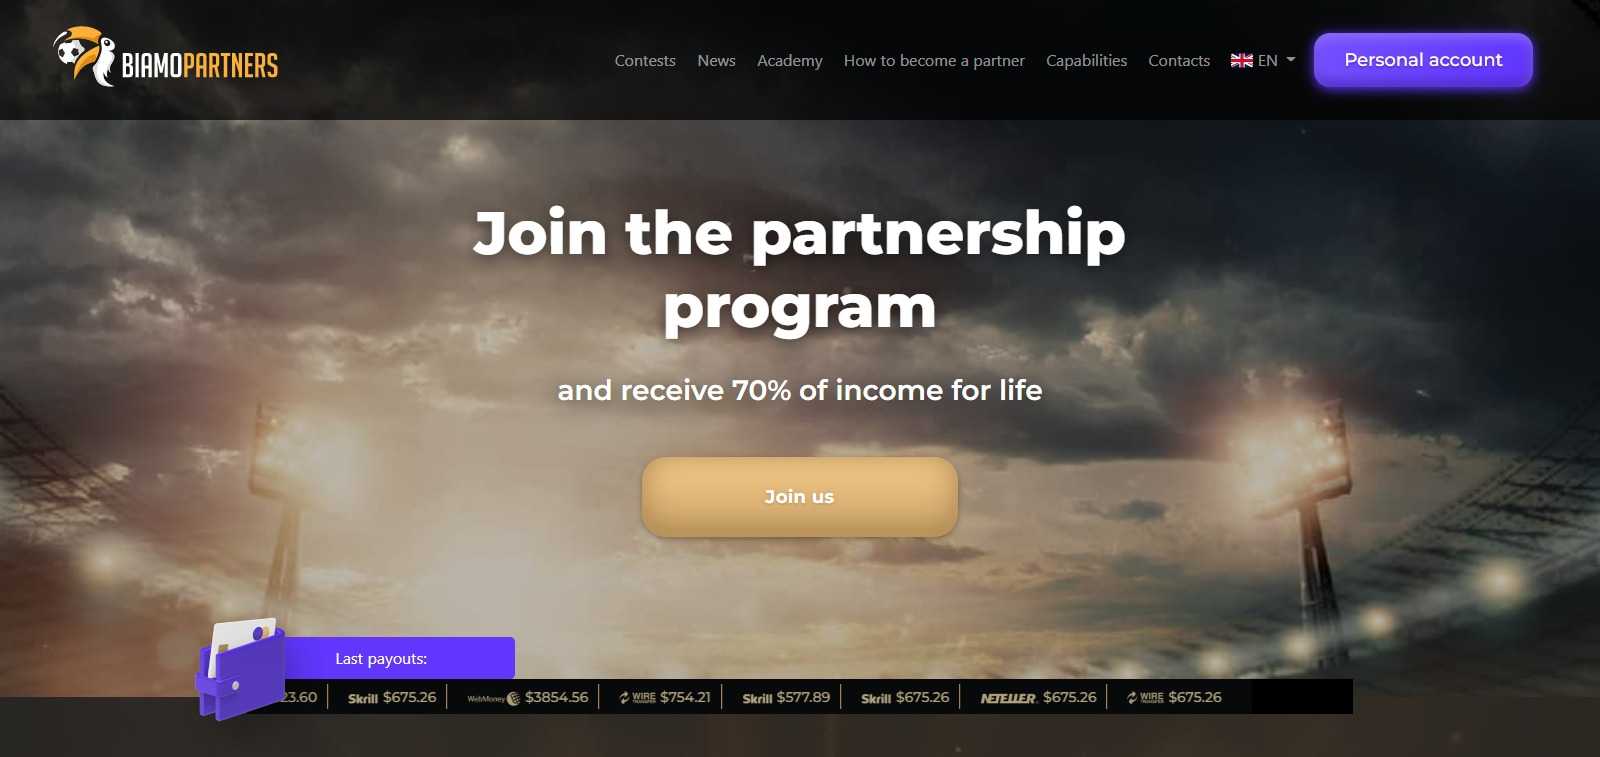 BiamoPartners Affiliate Program Review: Get Earn Up to 70% Recurring Revenue Share